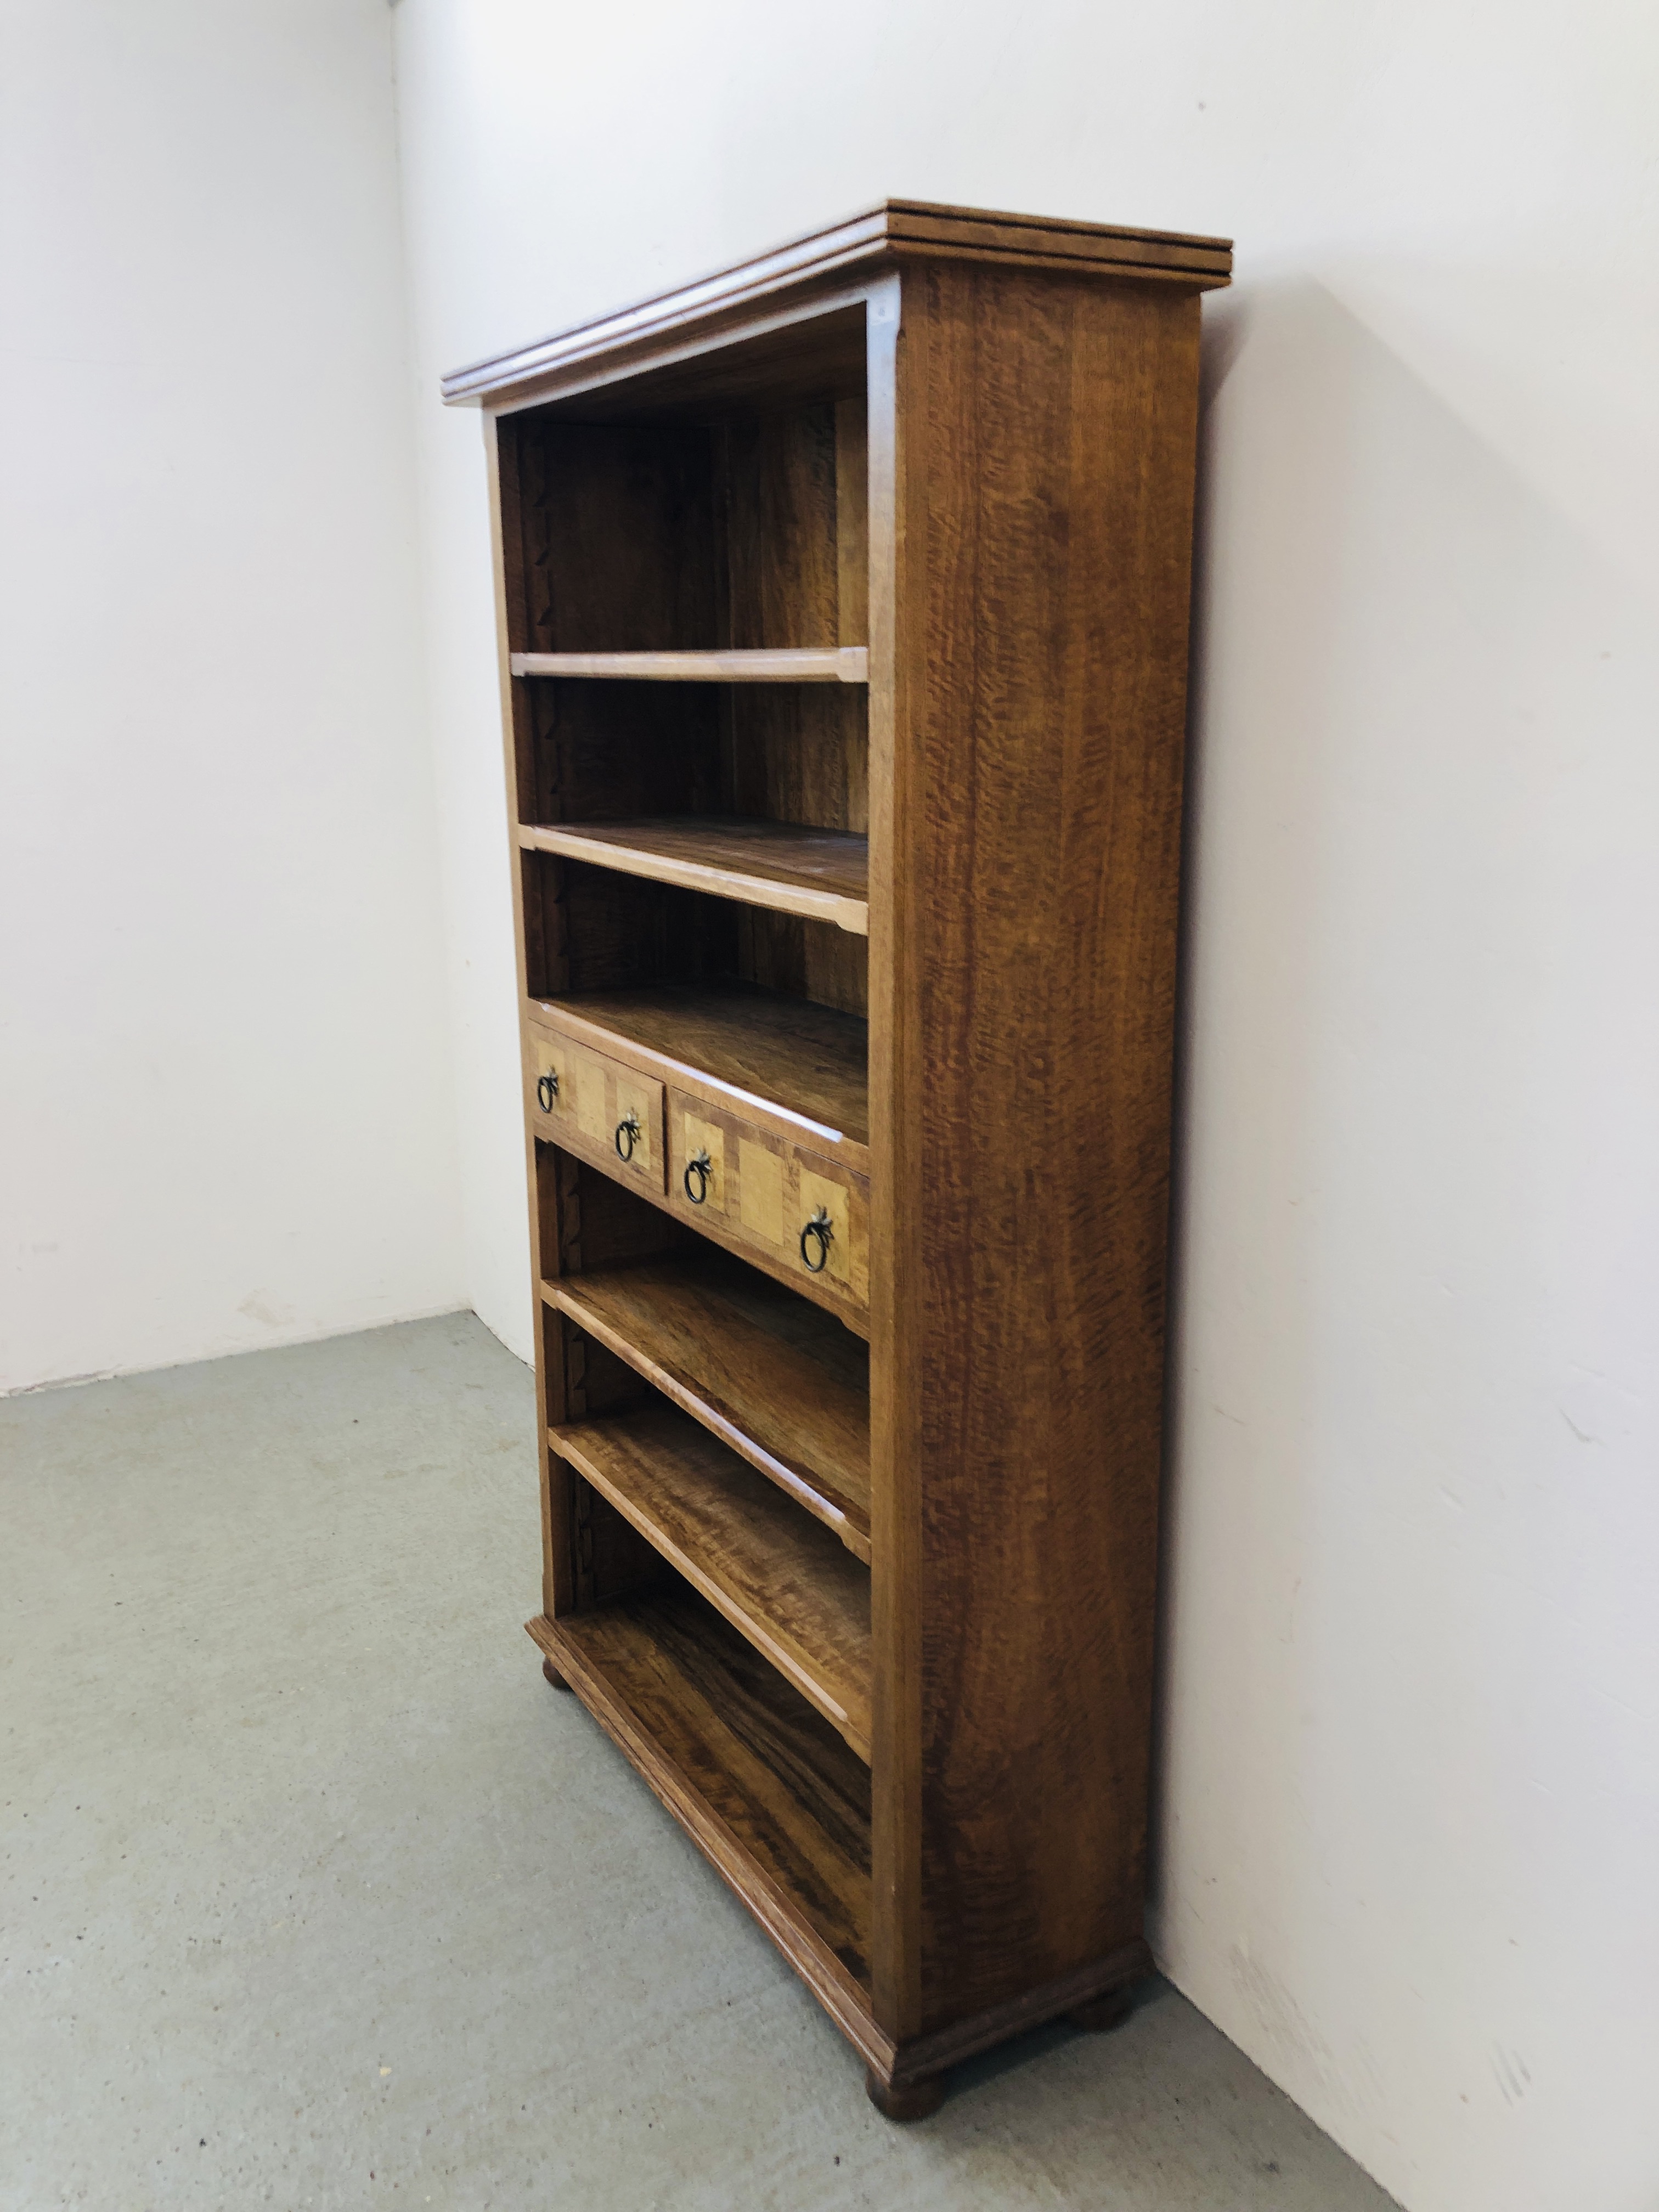 BAKER BEDFORD STYLE FLAGSTORE TWO DRAWER BOOKSHELF WITH ADJUSTABLE STELVES - HEIGHT 190CM. - Image 5 of 8